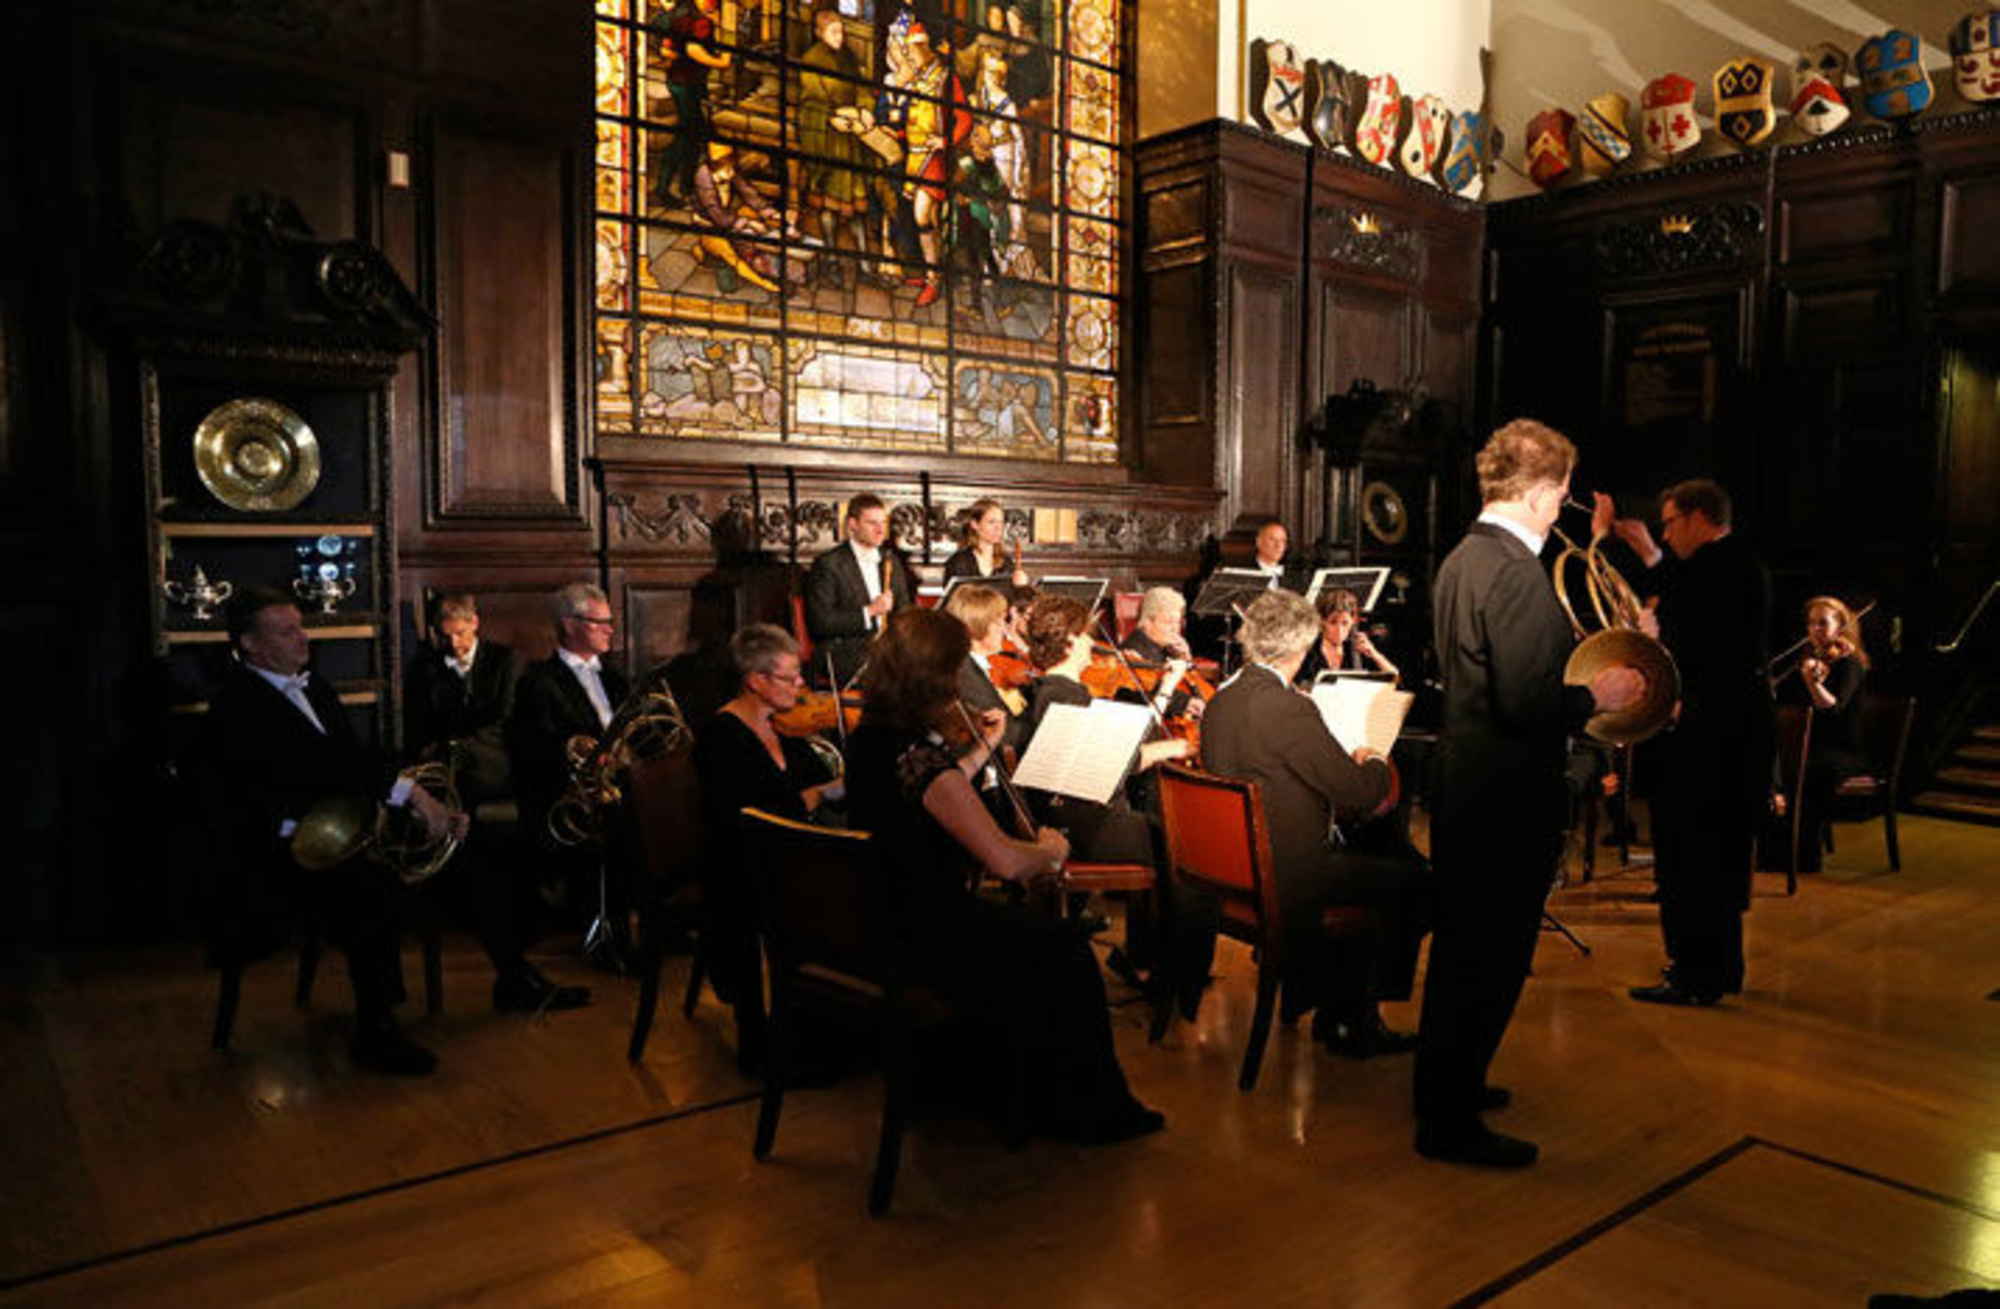 Classical Music Concert Venue in London Stationers' Hall